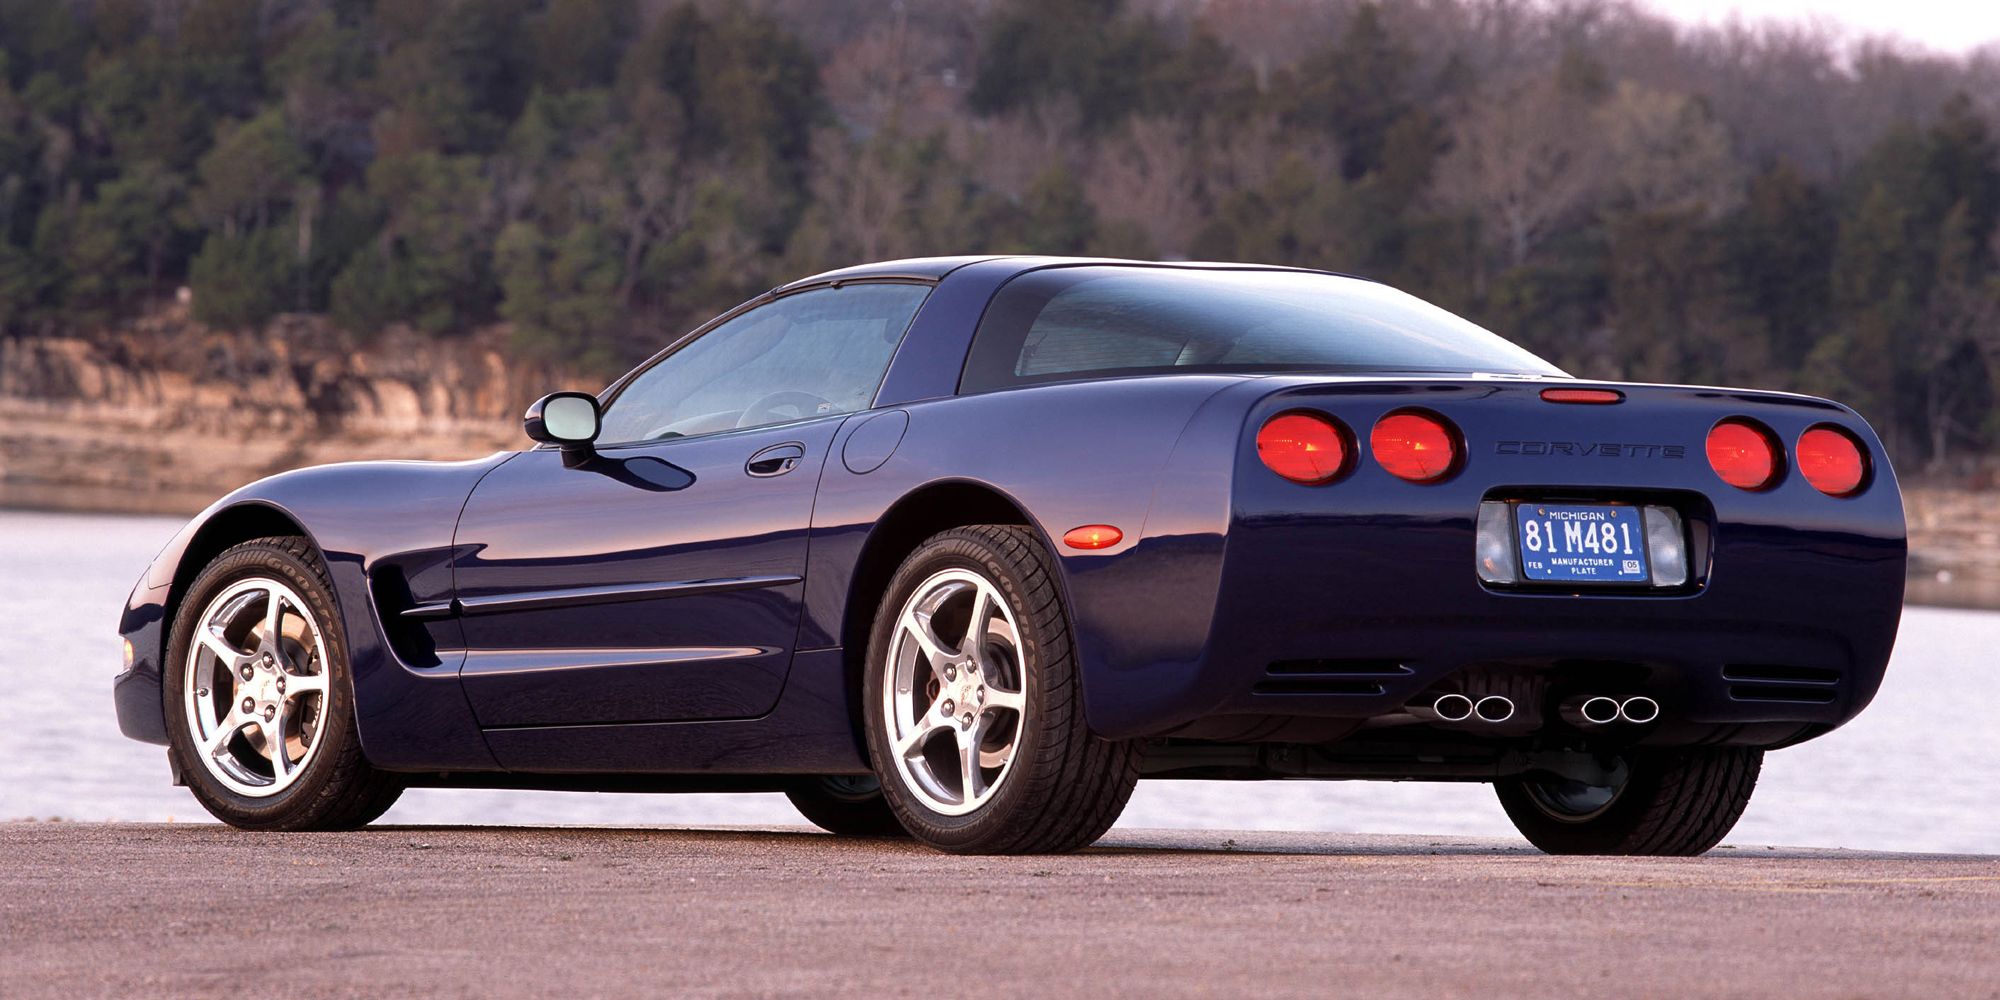 The rear of the C5 Corvette Coupe